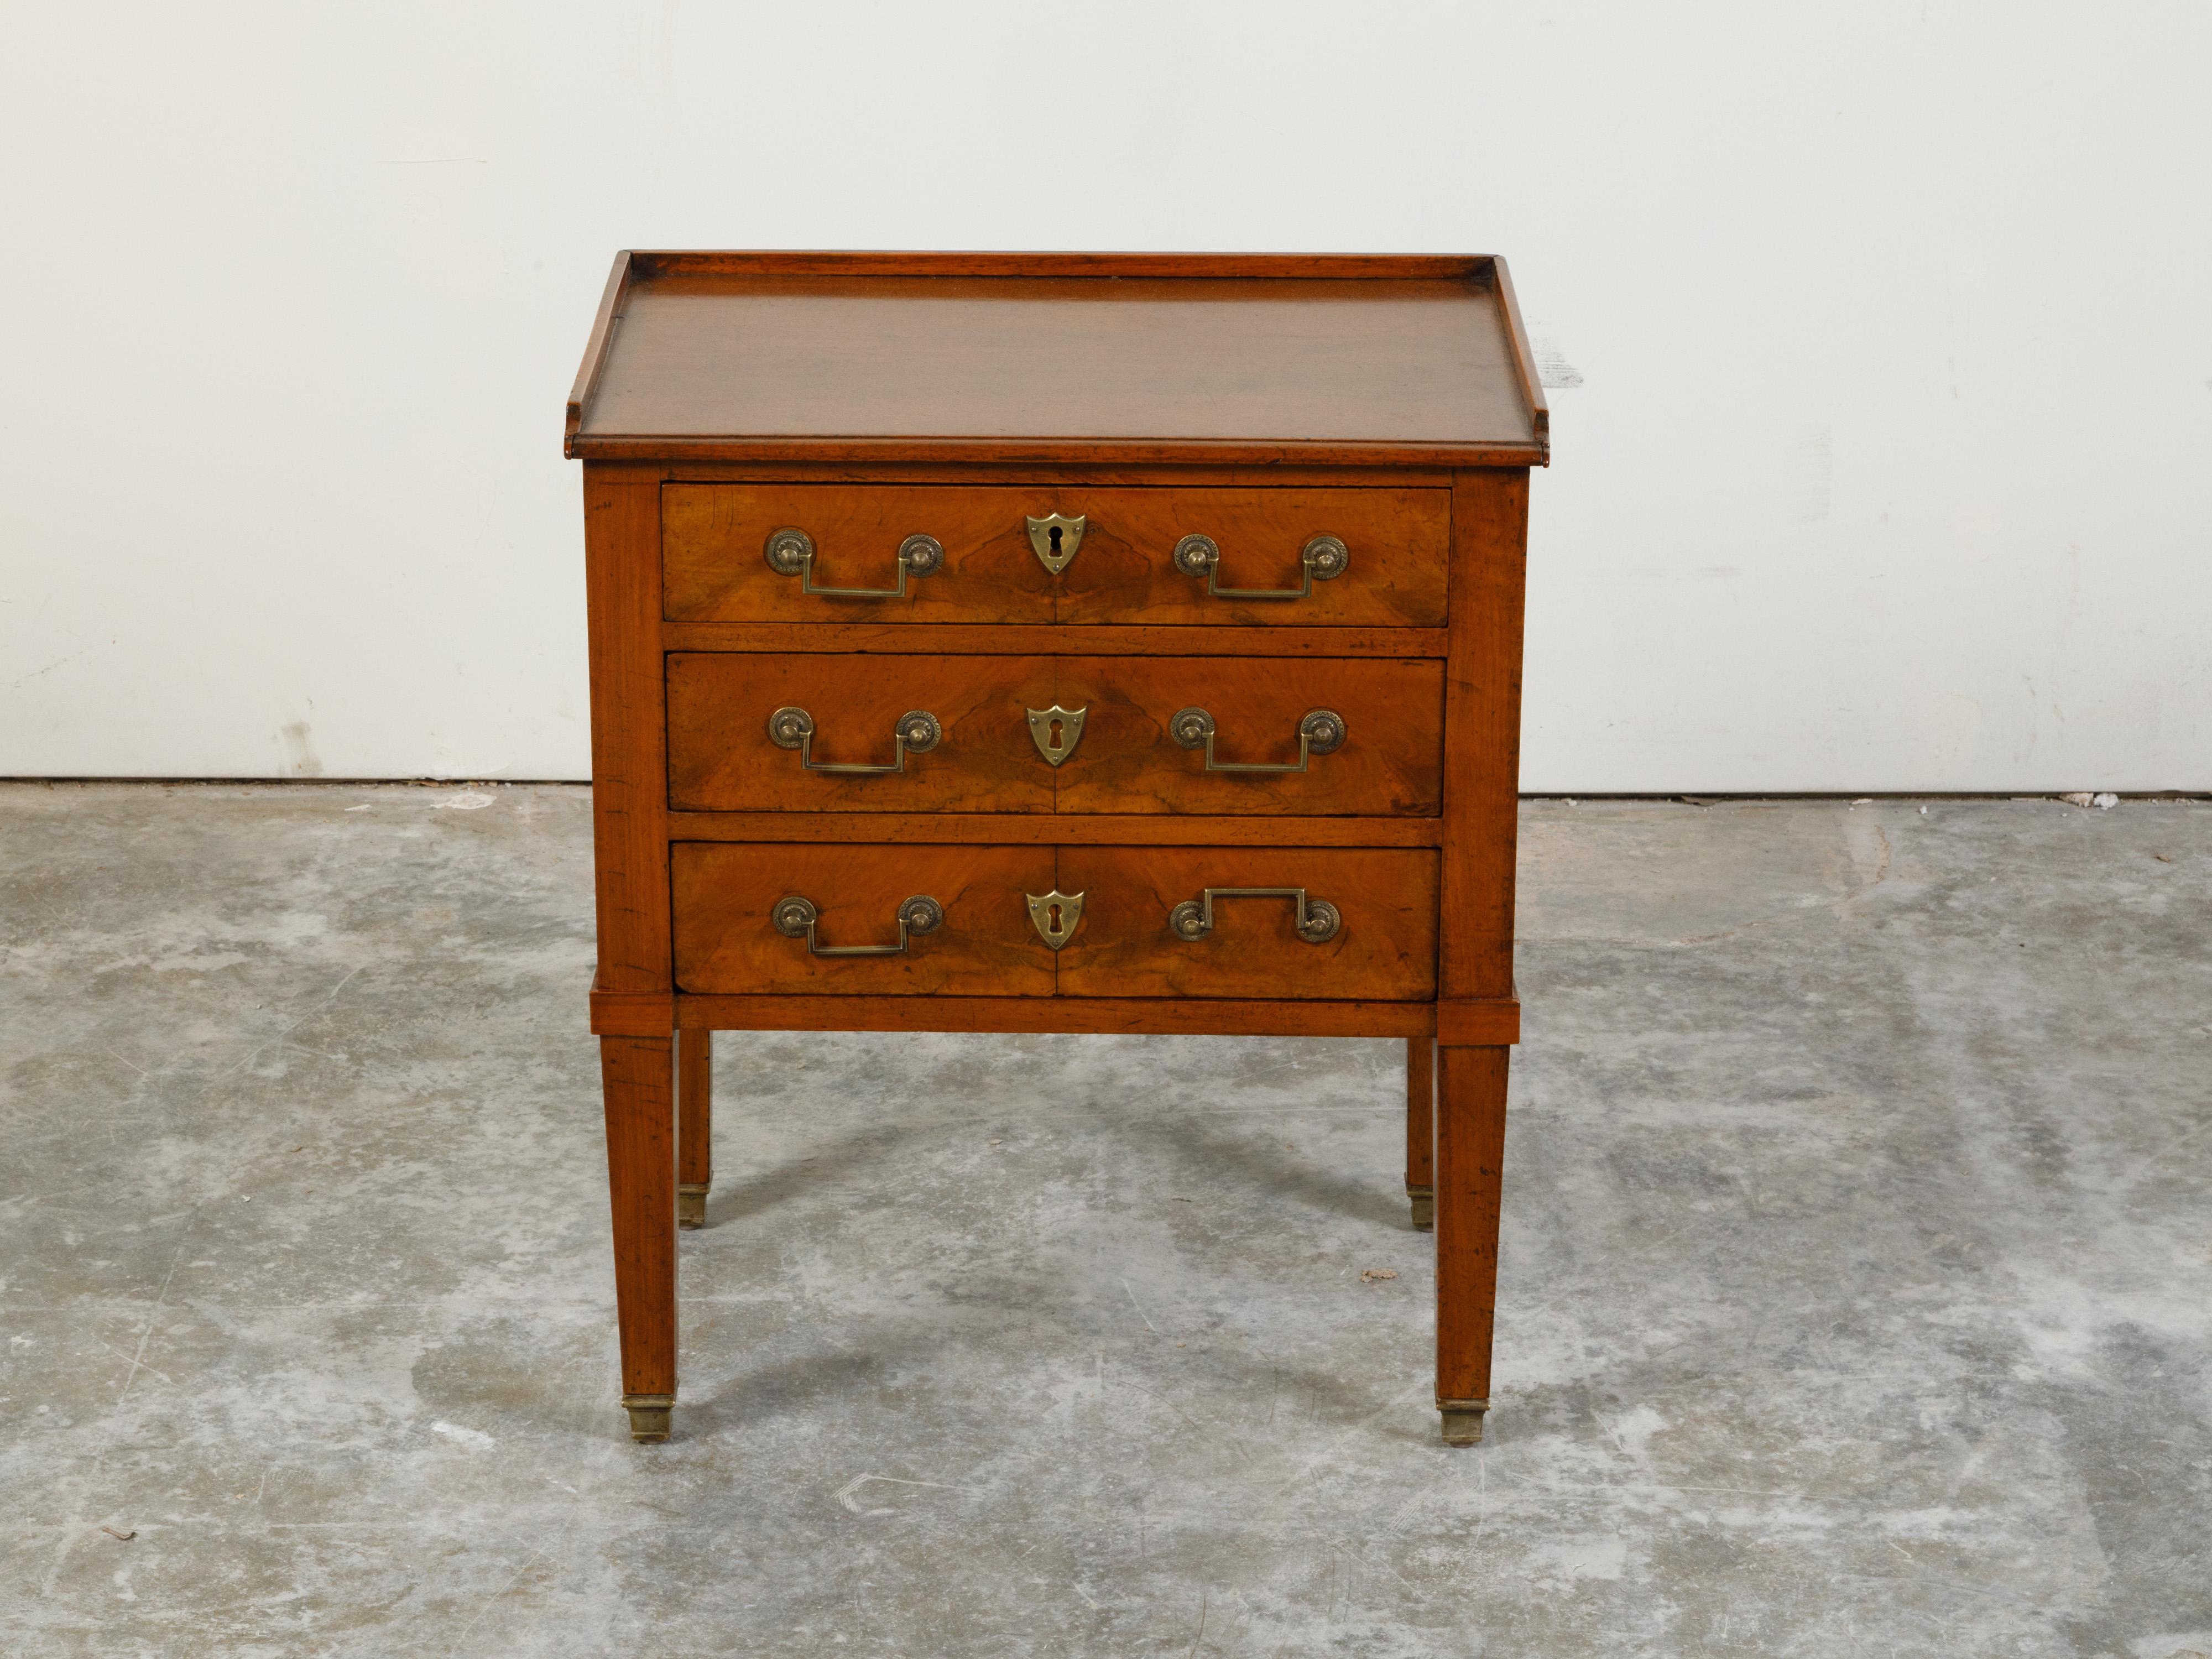 A French petite walnut bedside table from the 19th century, with three-quarter gallery and butterfly veneer. Created in France during the 19th century, this walnut nightstand features a rectangular top surrounded by a three-quarter gallery, sitting